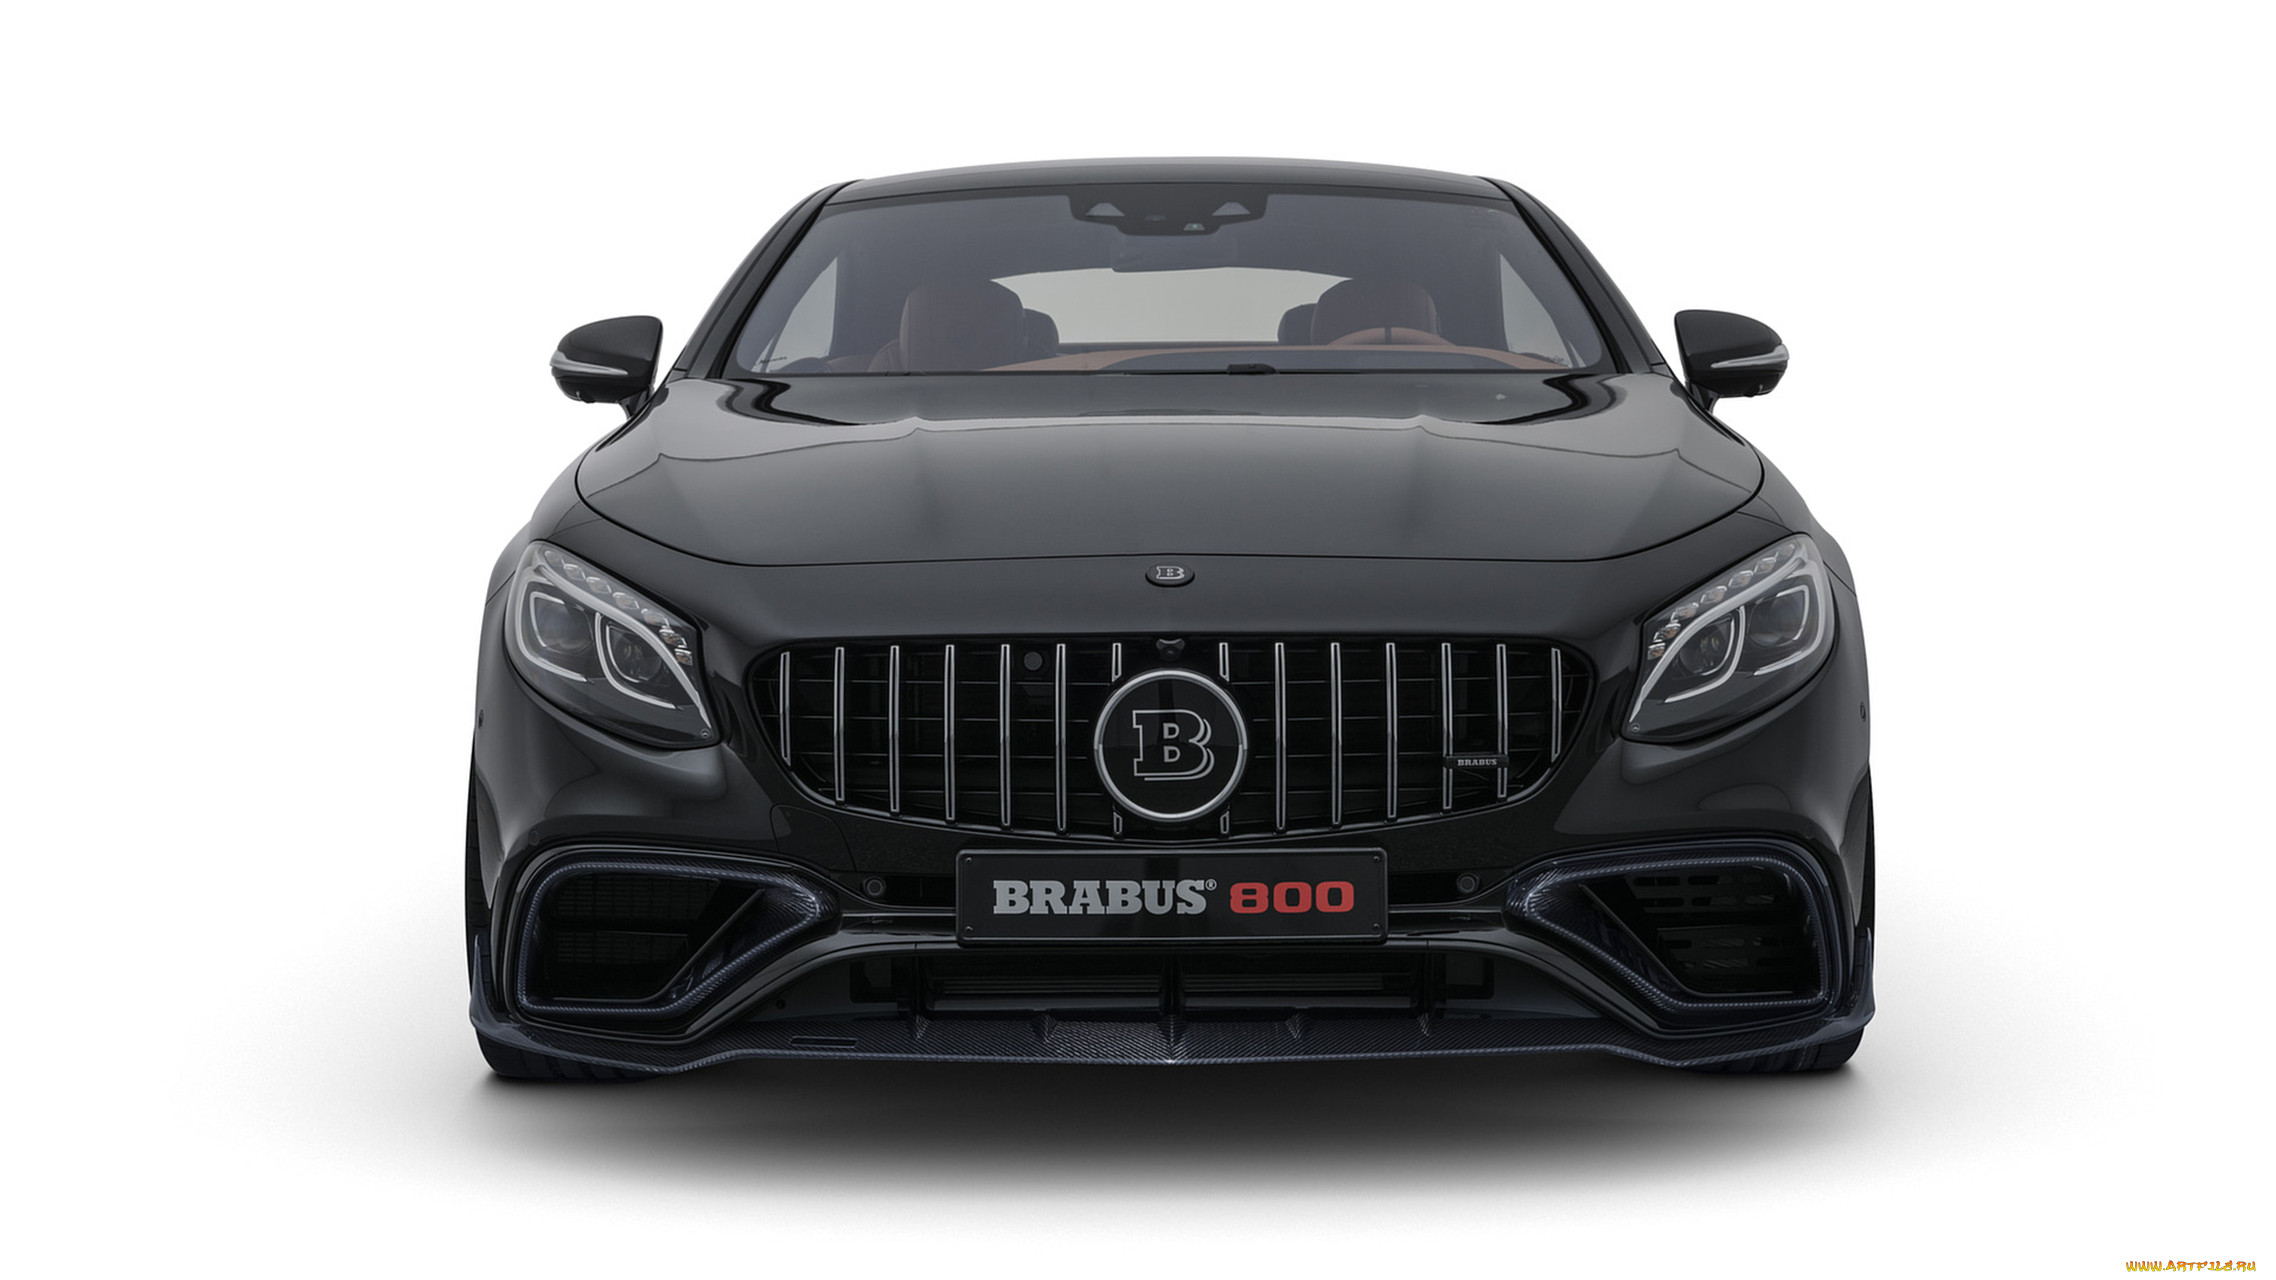 brabus 800 coupe based on mercedes-benz amg s-63 4matic coupe 2018, , brabus, 2018, coupe, 4matic, s-63, amg, mercedes-benz, based, 800